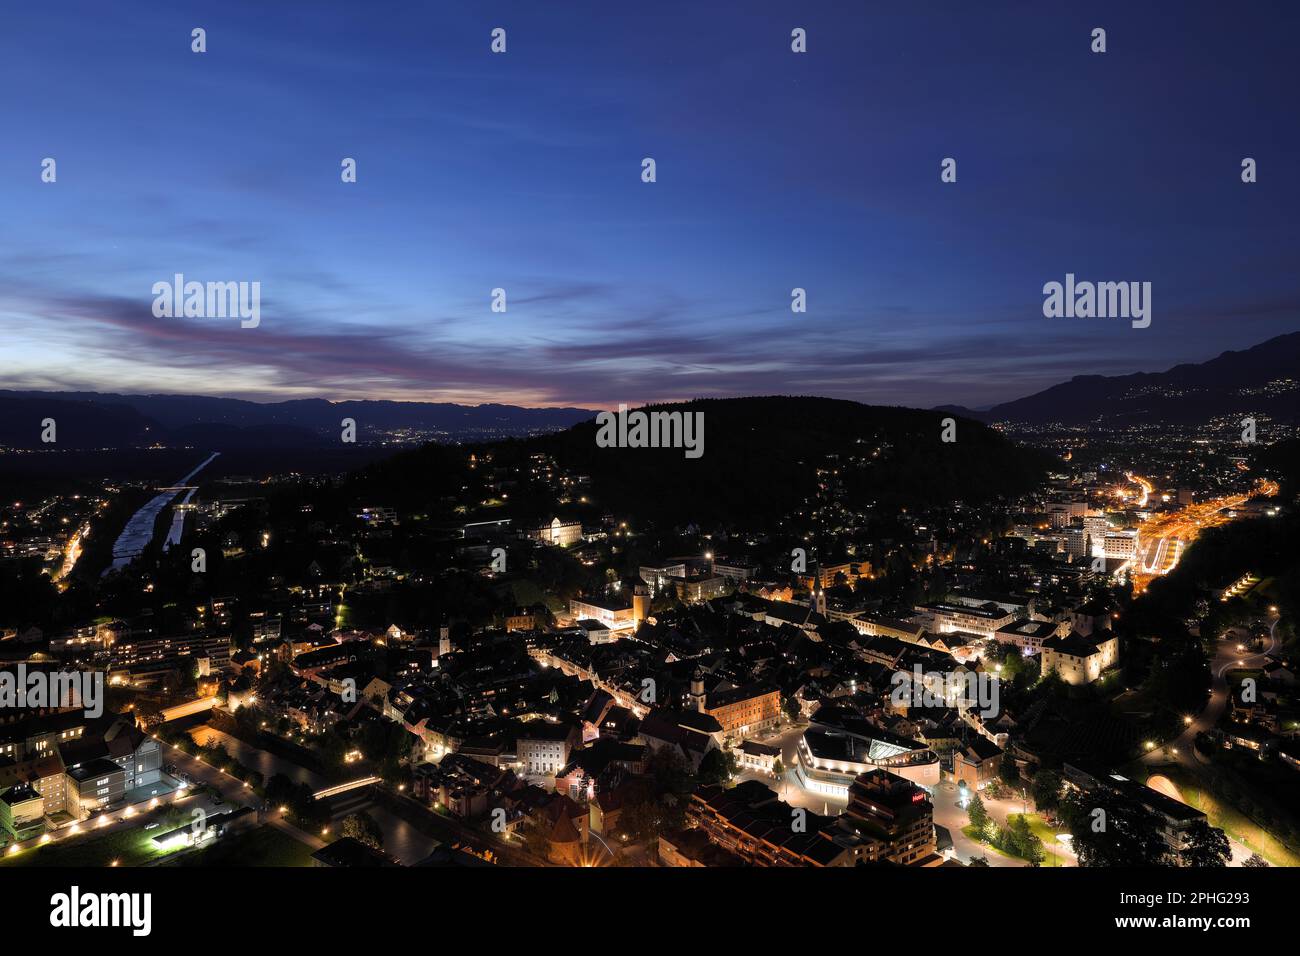 Panoramic image of Feldkirch in the evening after sunset Stock Photo